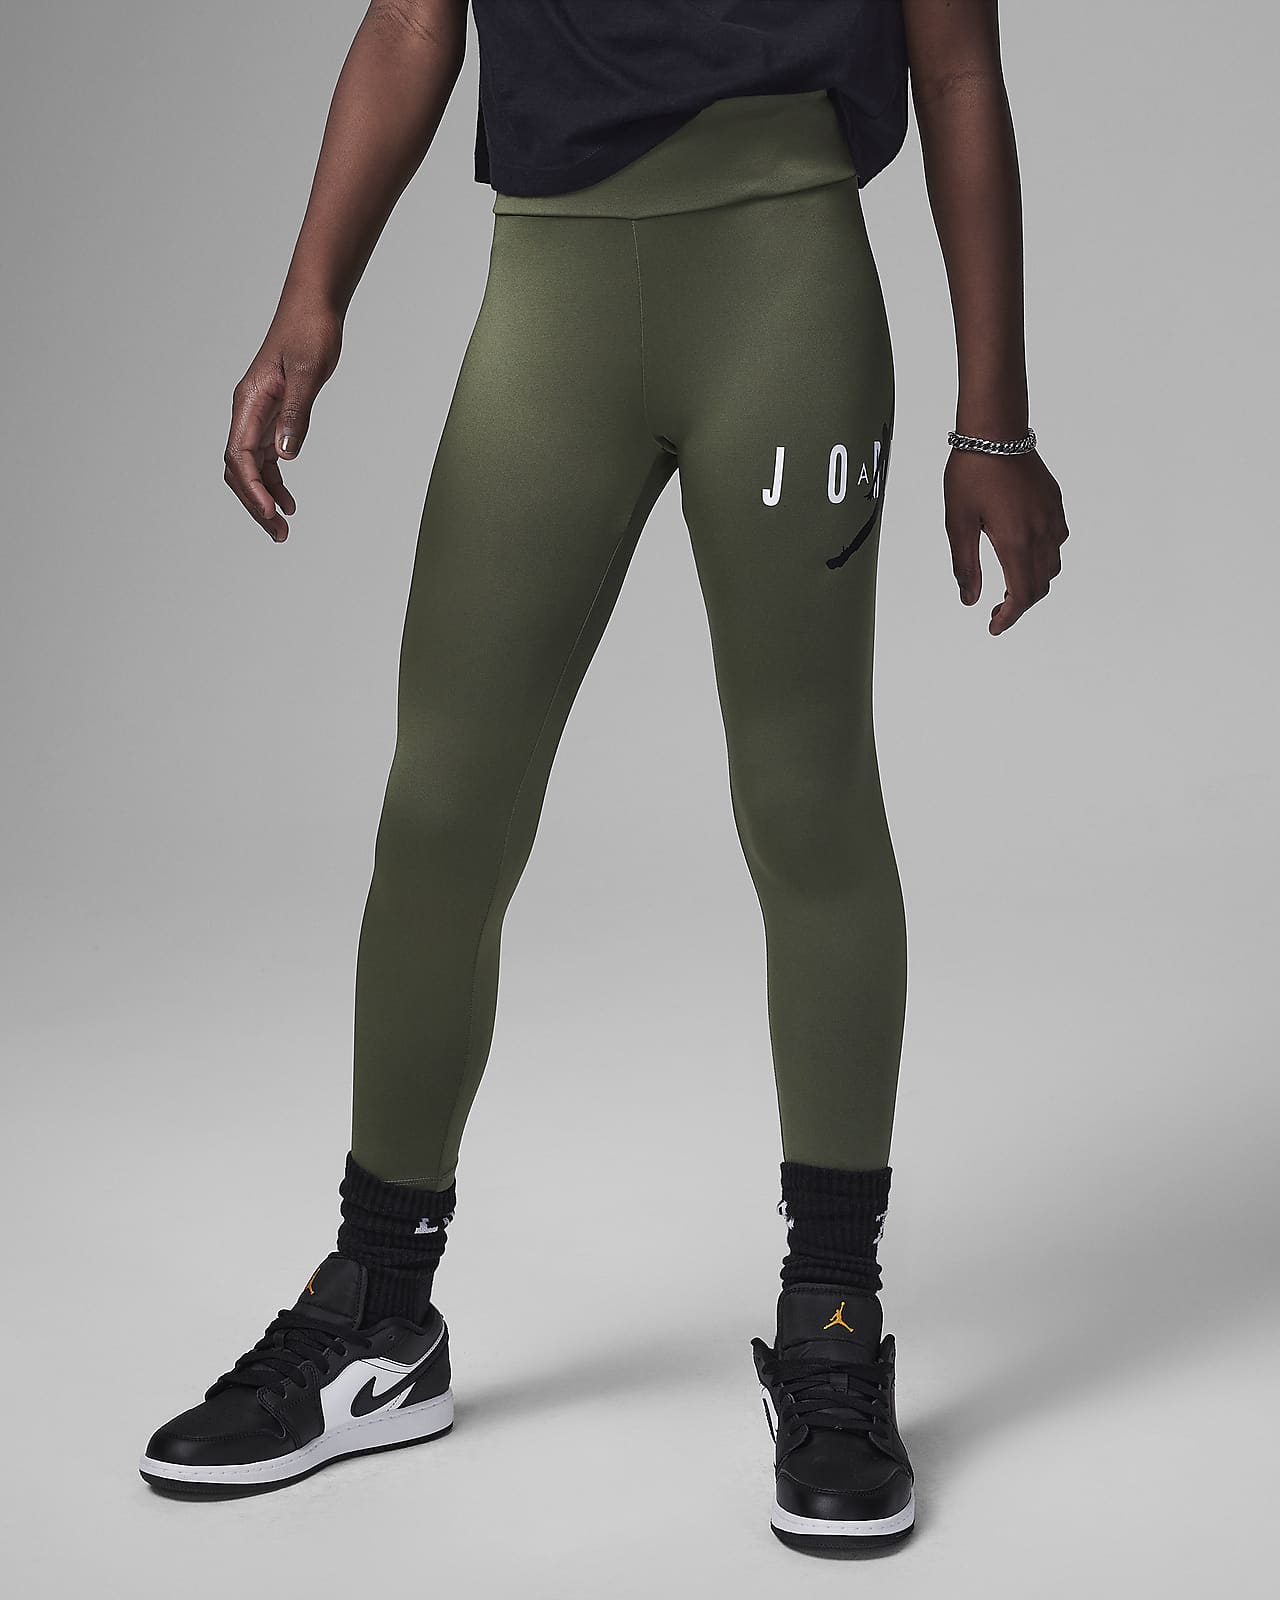 Nike Tight Fit Leggings Olive Army Green Size XS - $60 New With